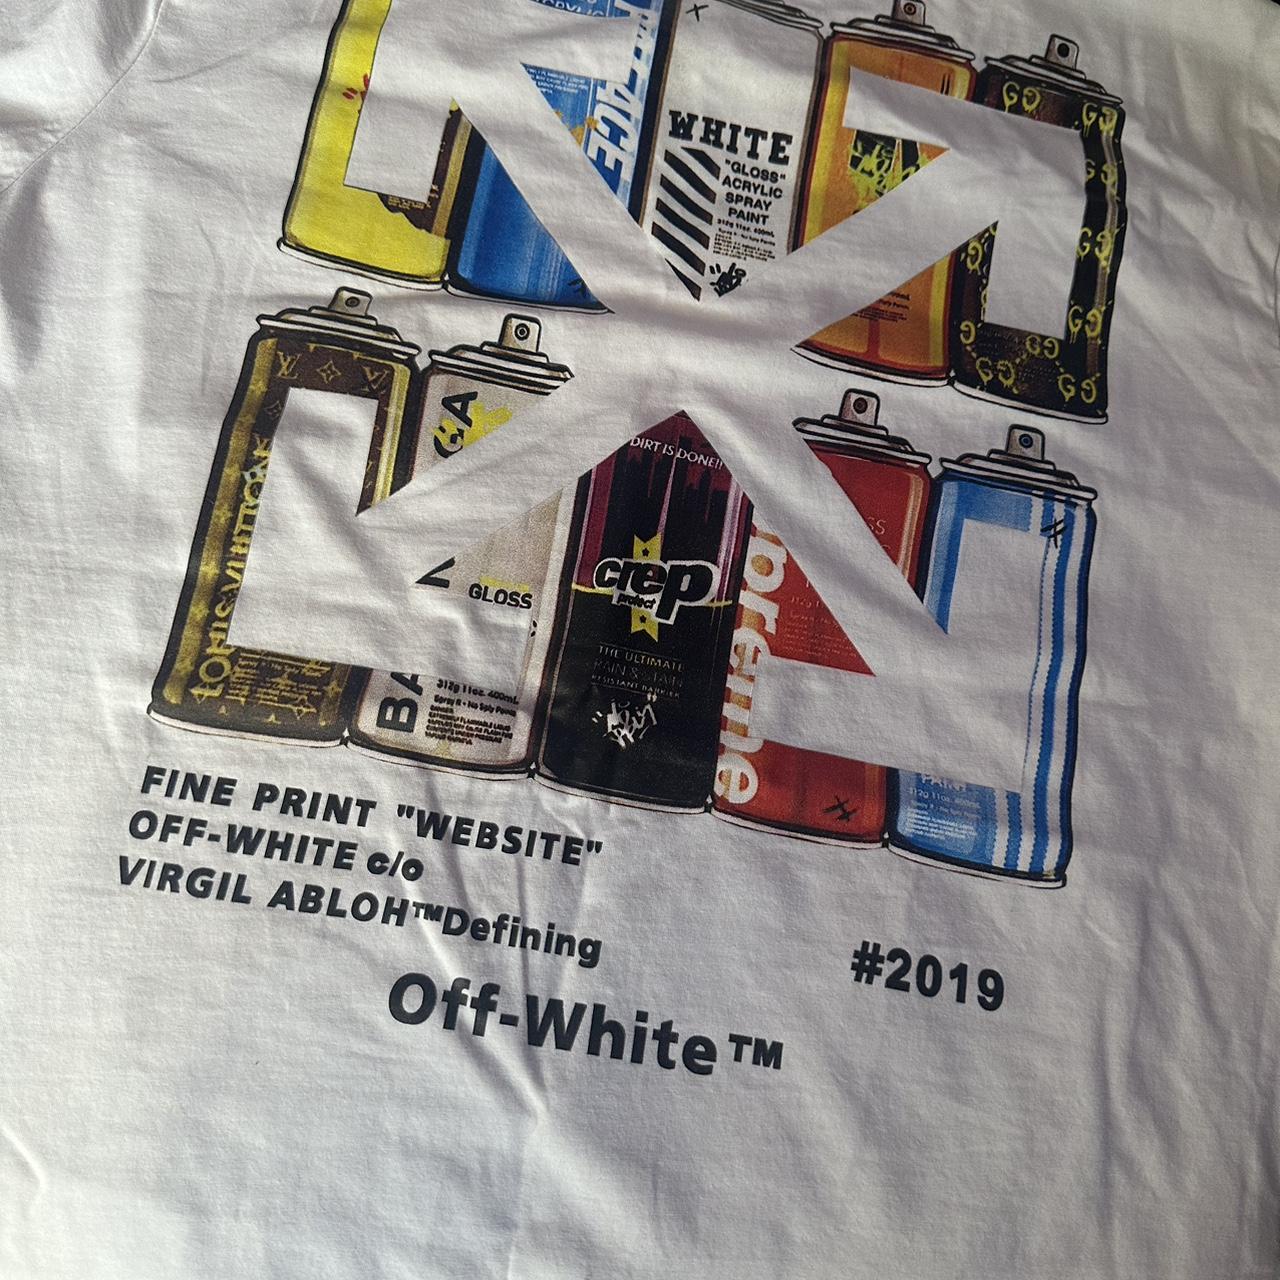 White 2019 OFF - WHITE M Depop TEE Fits UNISEX well